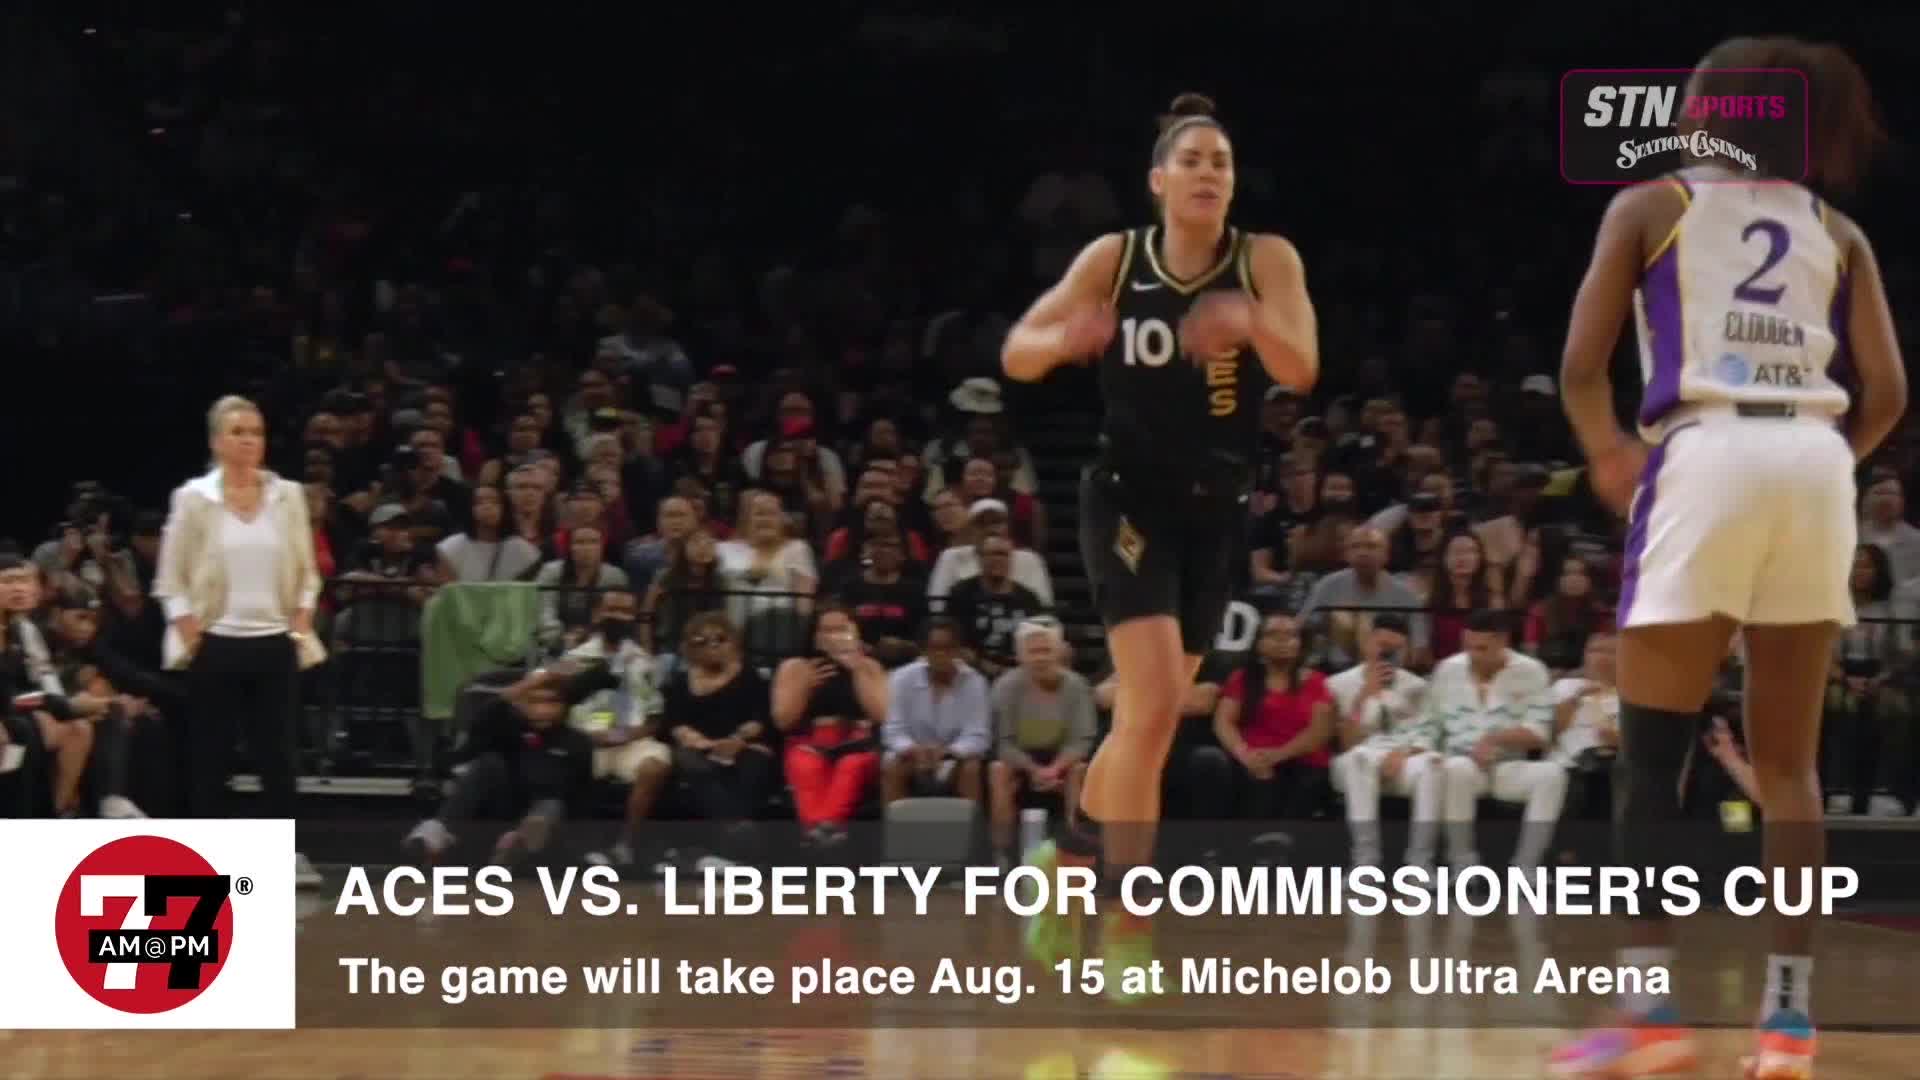 Aces face off against Liberty for Commisioner’s Cup